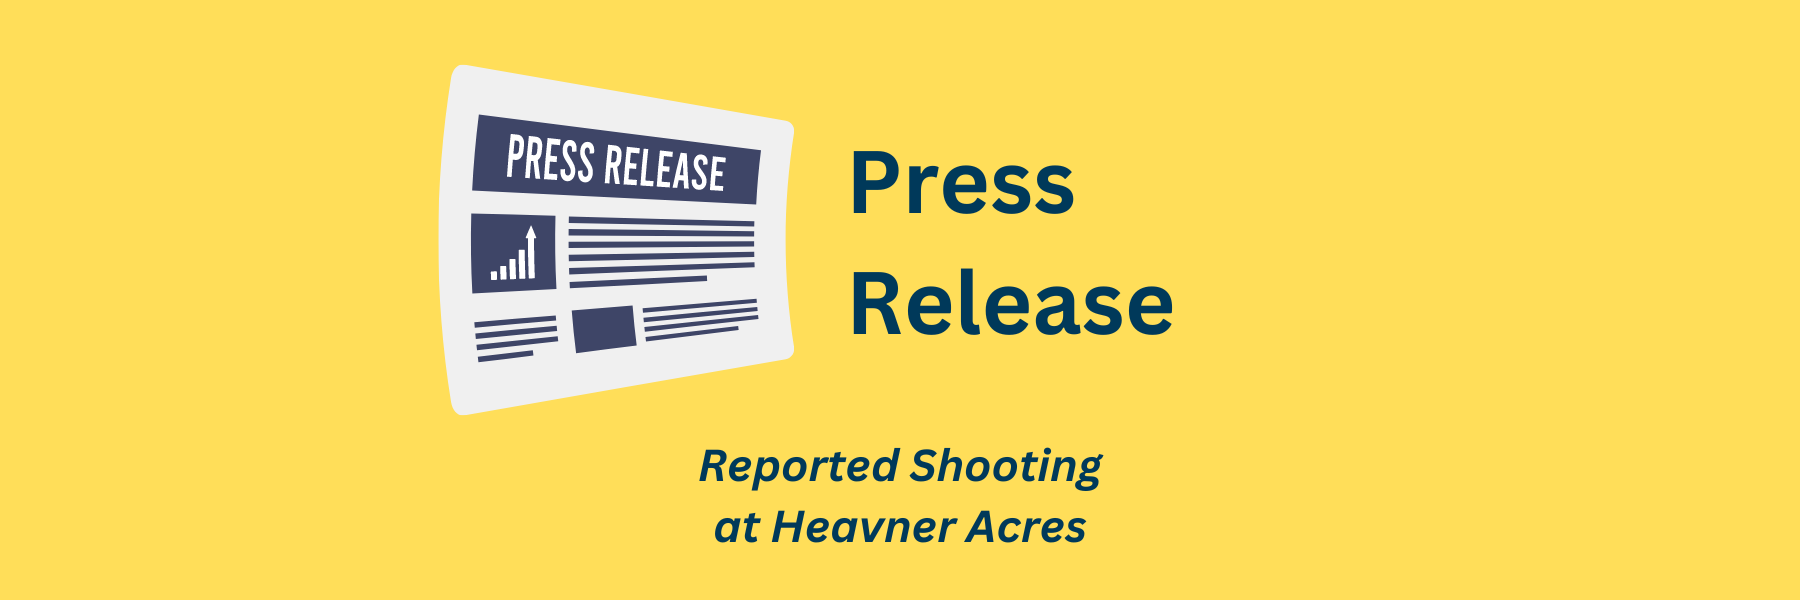 Reported Shooting at Heavner Acres